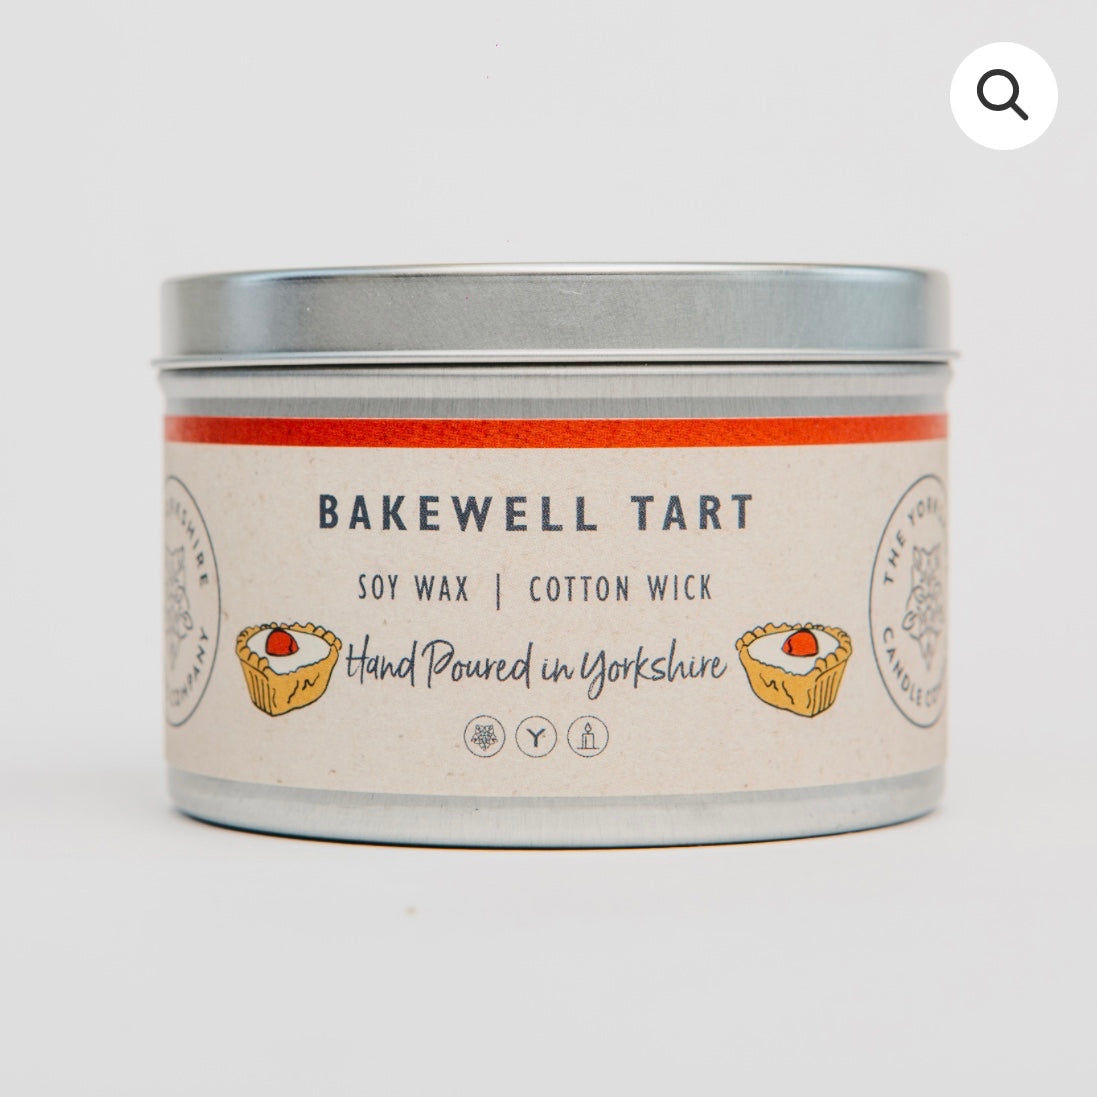 Yorkshire Candle Company - Bakewell Tart